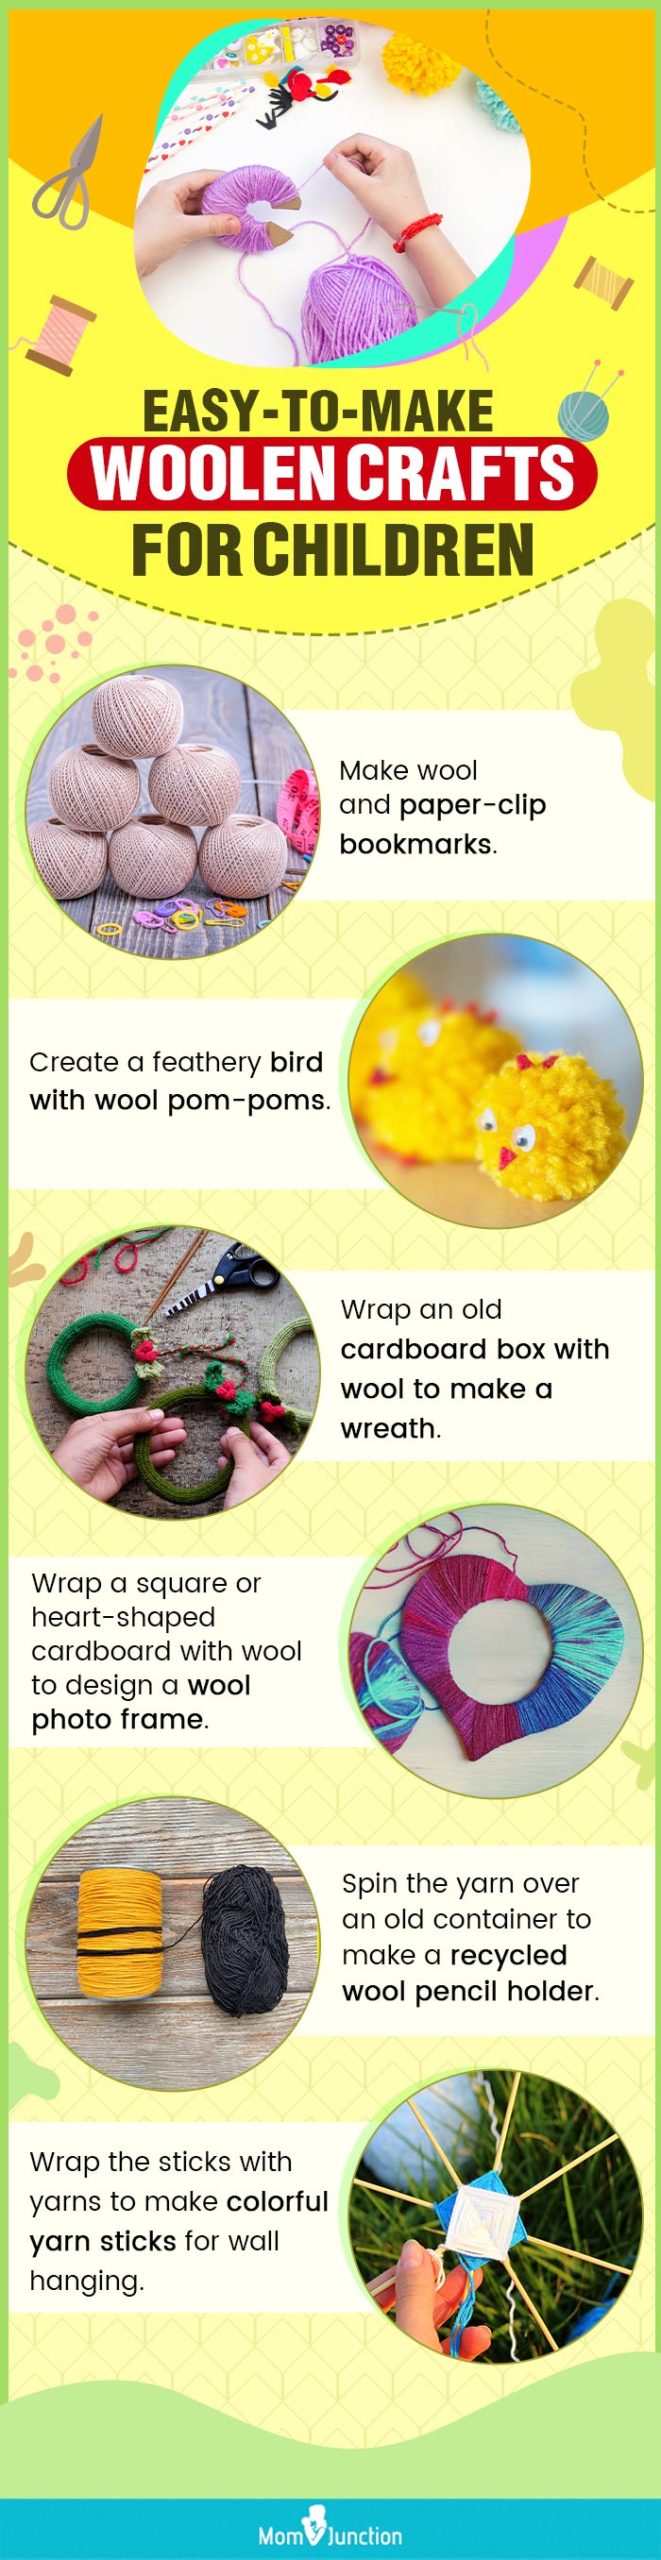 easy to make woolen crafts for children (infographic)